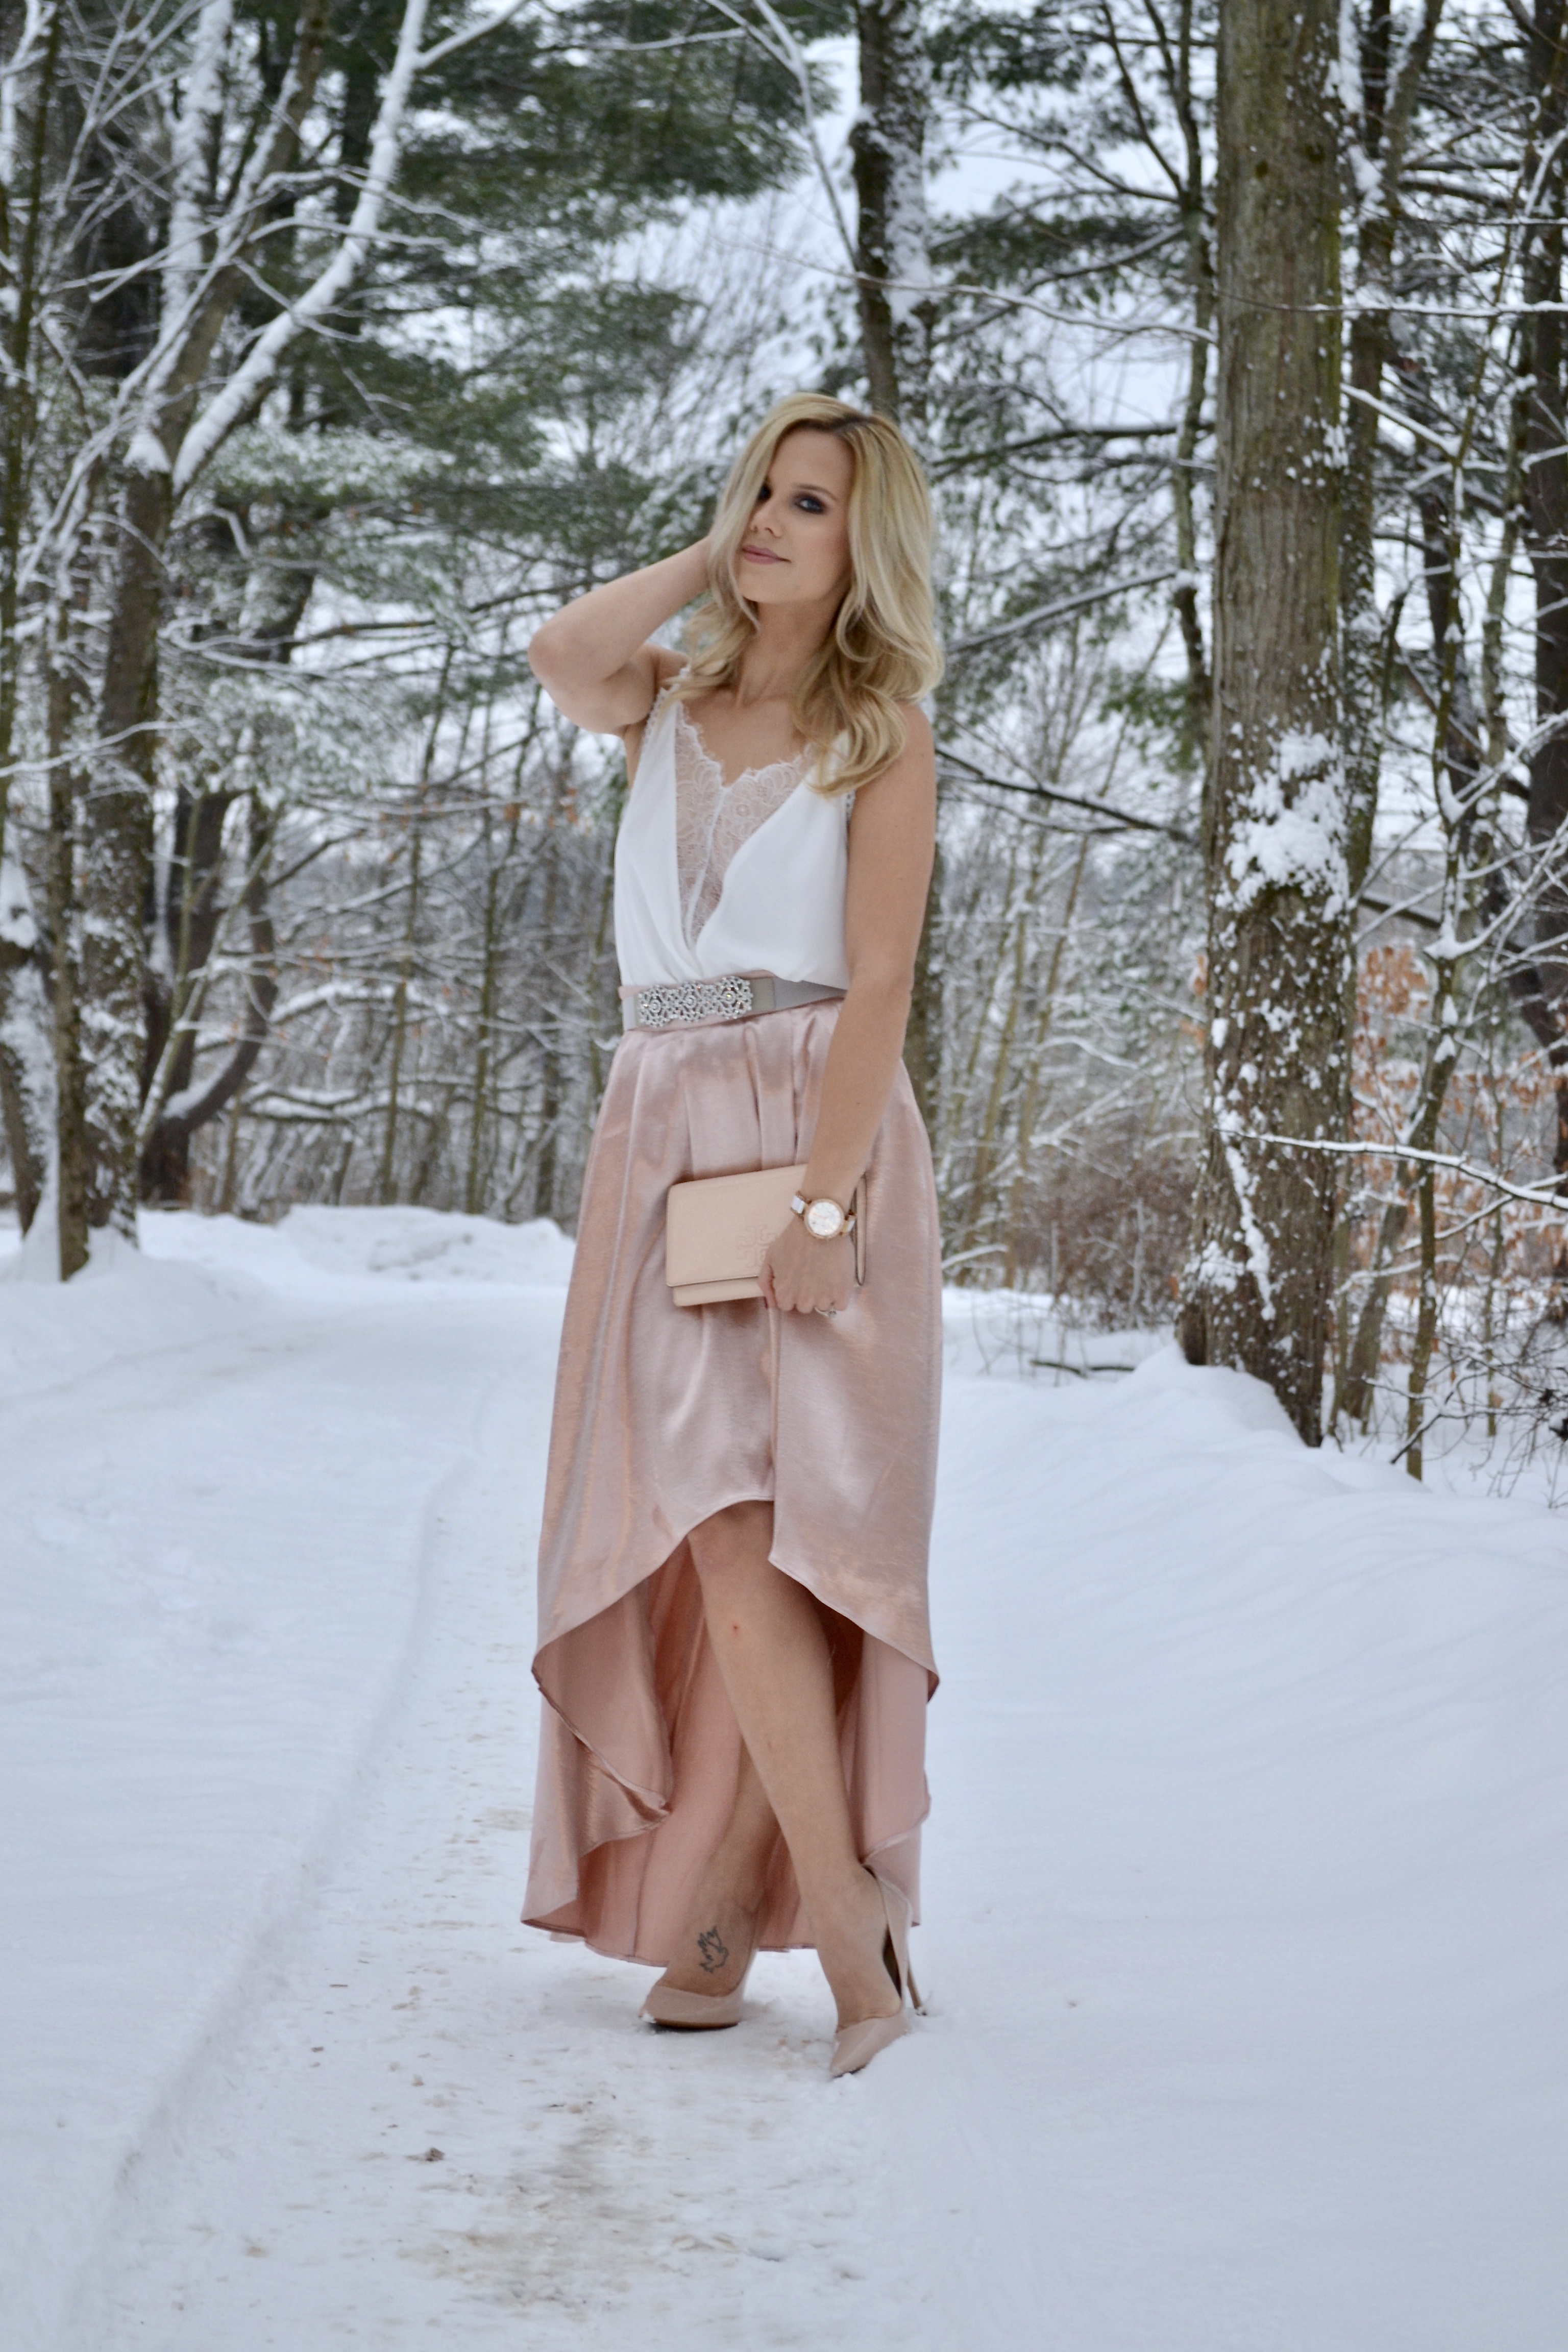 metallic skirt, white lace cami, nude heels, tory burch bag, and glitter belt on Glam Life Living